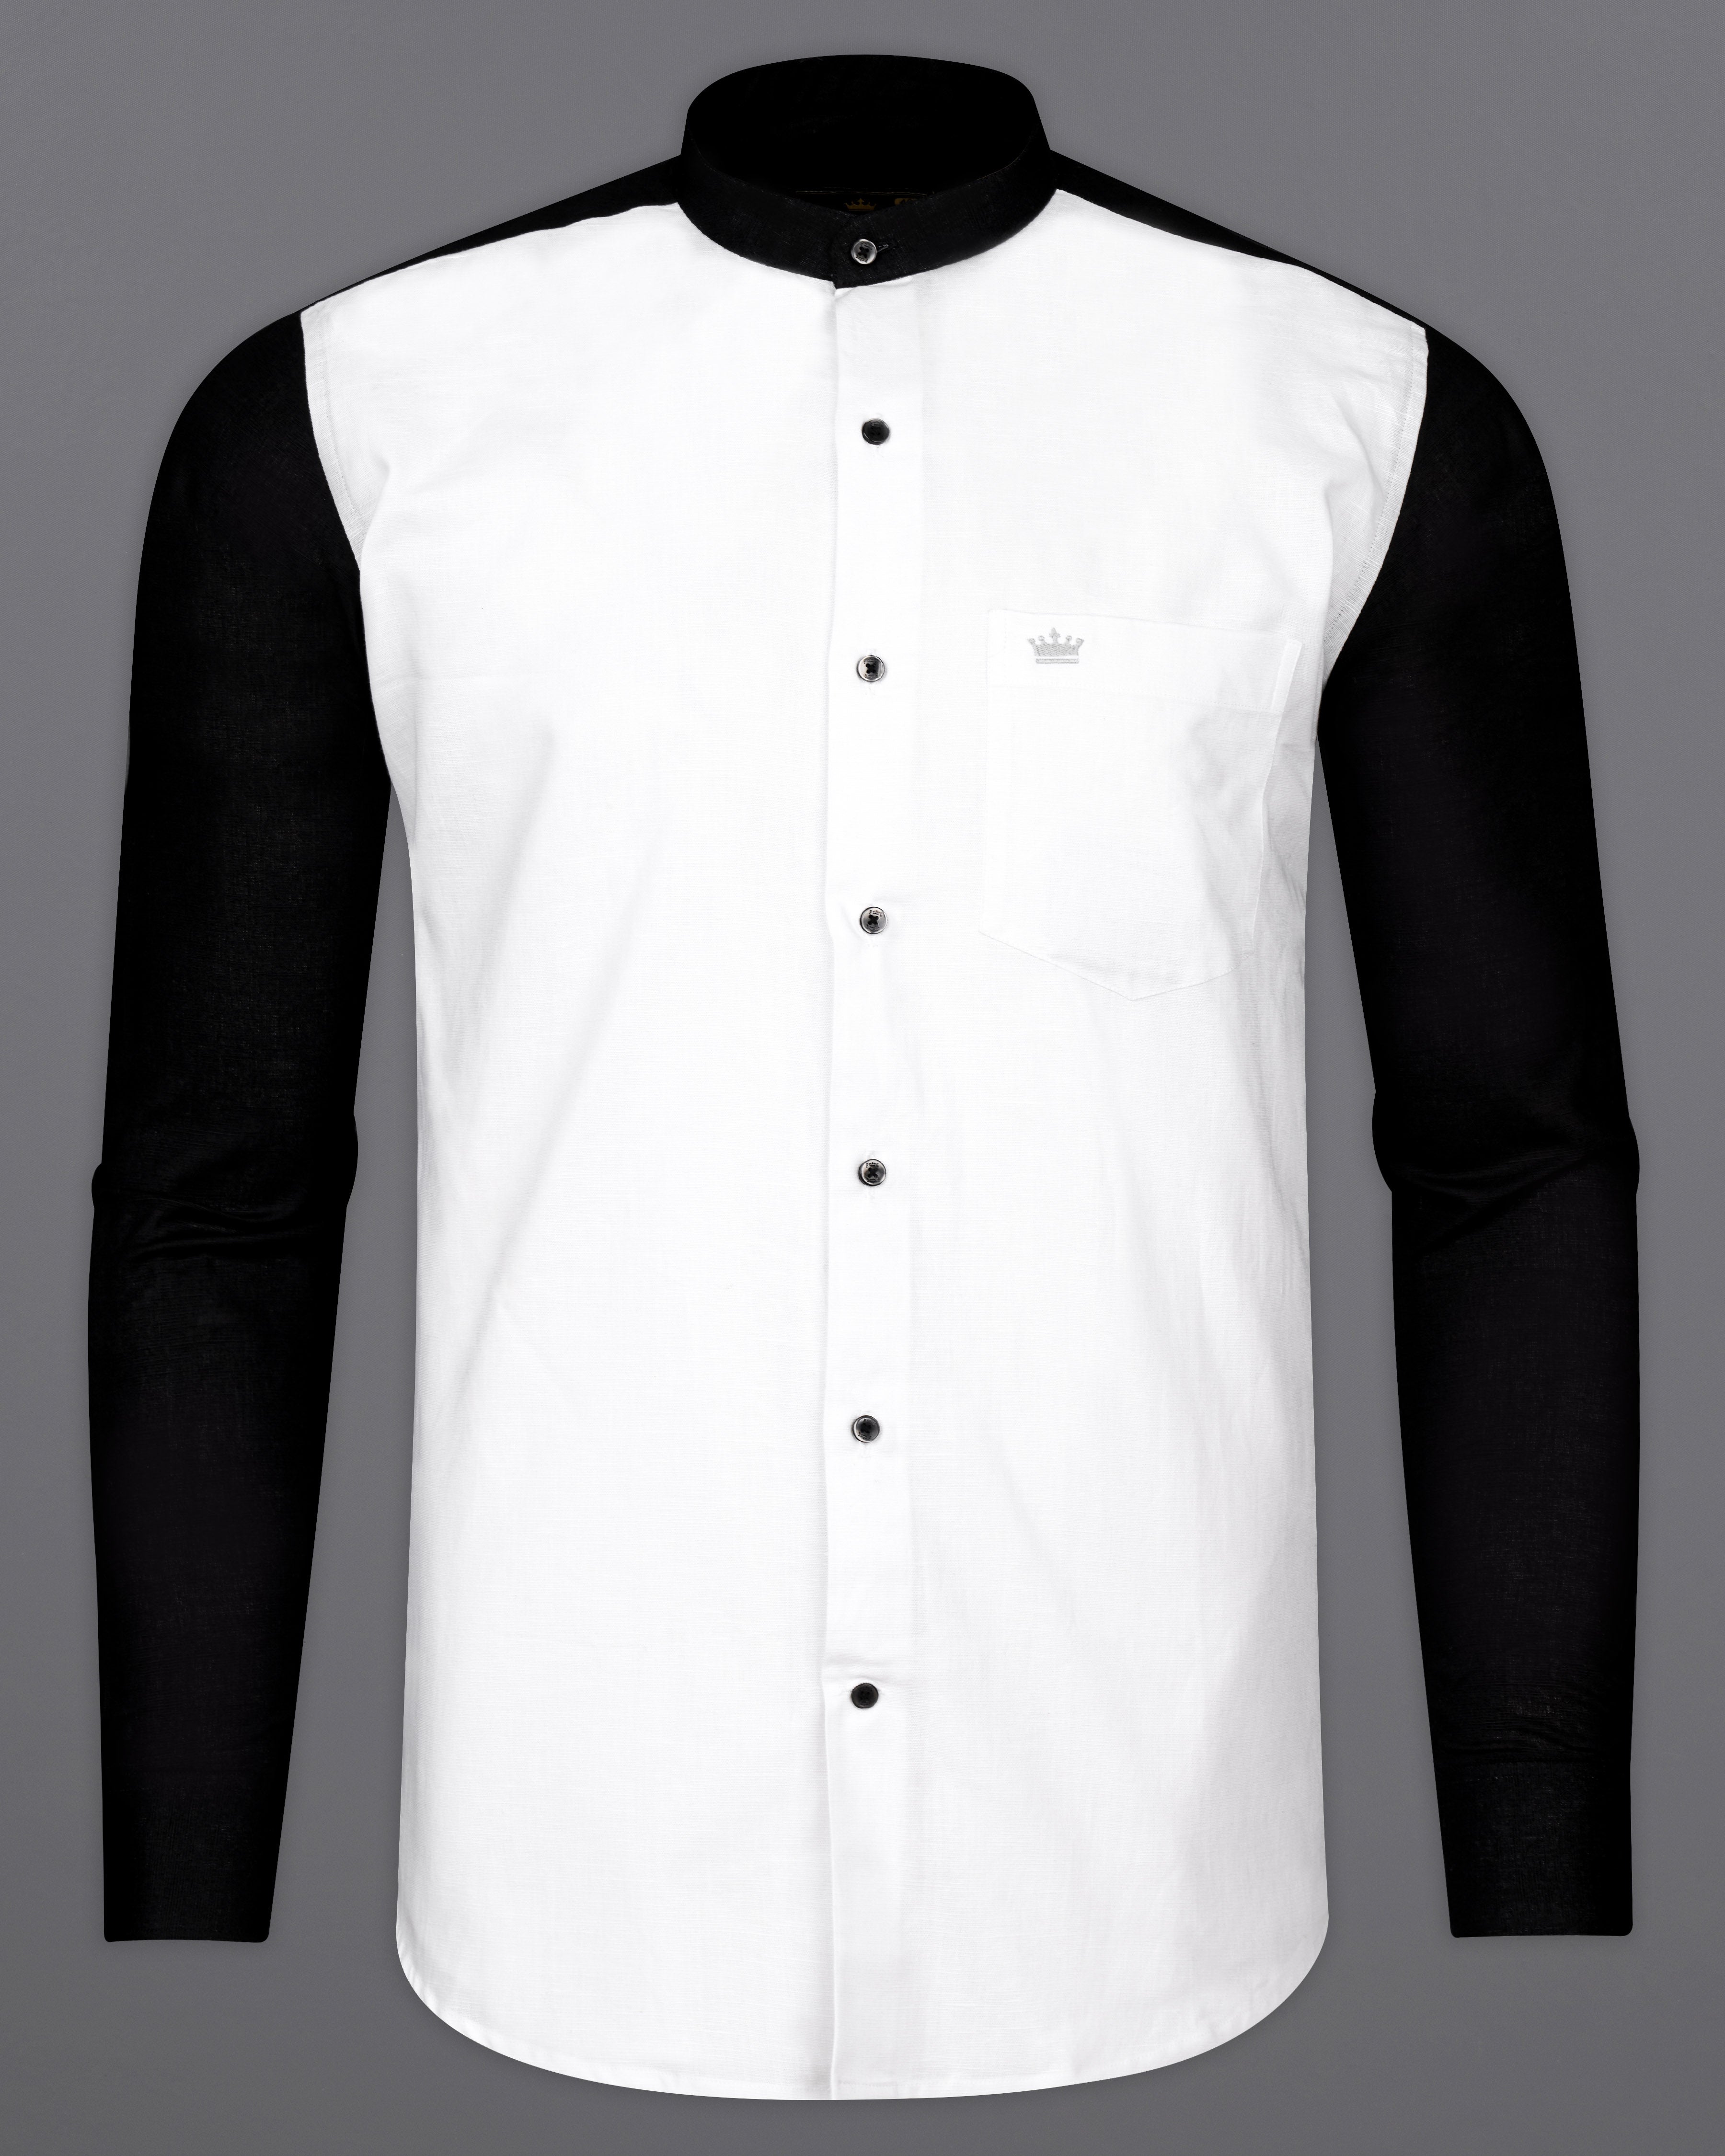 Bright White with Black Patterned Luxurious Linen Shirt 3188M-BLK-P17-38, 3188M-BLK-P17-H-38, 3188M-BLK-P17-39, 3188M-BLK-P17-H-39, 3188M-BLK-P17-40, 3188M-BLK-P17-H-40, 3188M-BLK-P17-42, 3188M-BLK-P17-H-42, 3188M-BLK-P17-44, 3188M-BLK-P17-H-44, 3188M-BLK-P17-46, 3188M-BLK-P17-H-46, 3188M-BLK-P17-48, 3188M-BLK-P17-H-48, 3188M-BLK-P17-50, 3188M-BLK-P17-H-50, 3188M-BLK-P17-52, 3188M-BLK-P17-H-52